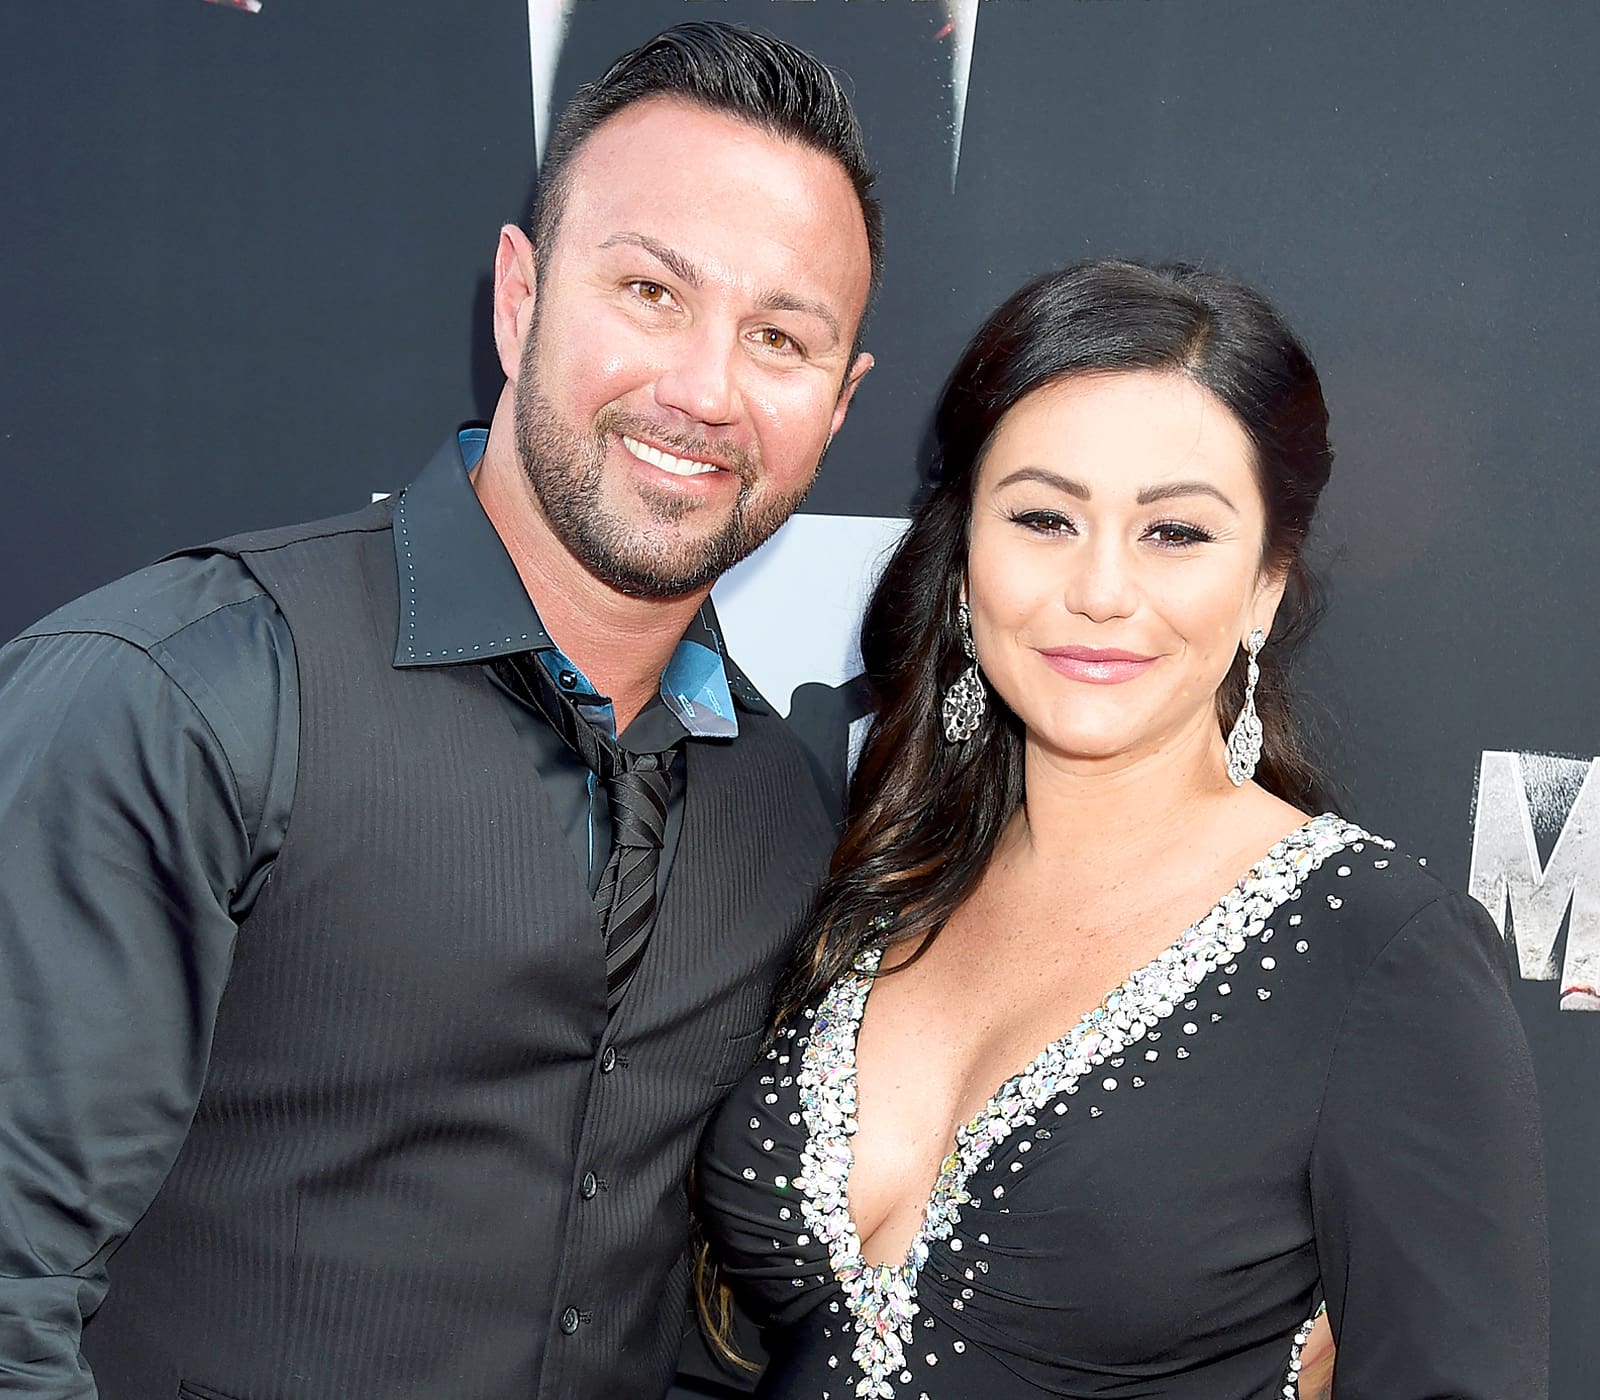 JWoww and Roger